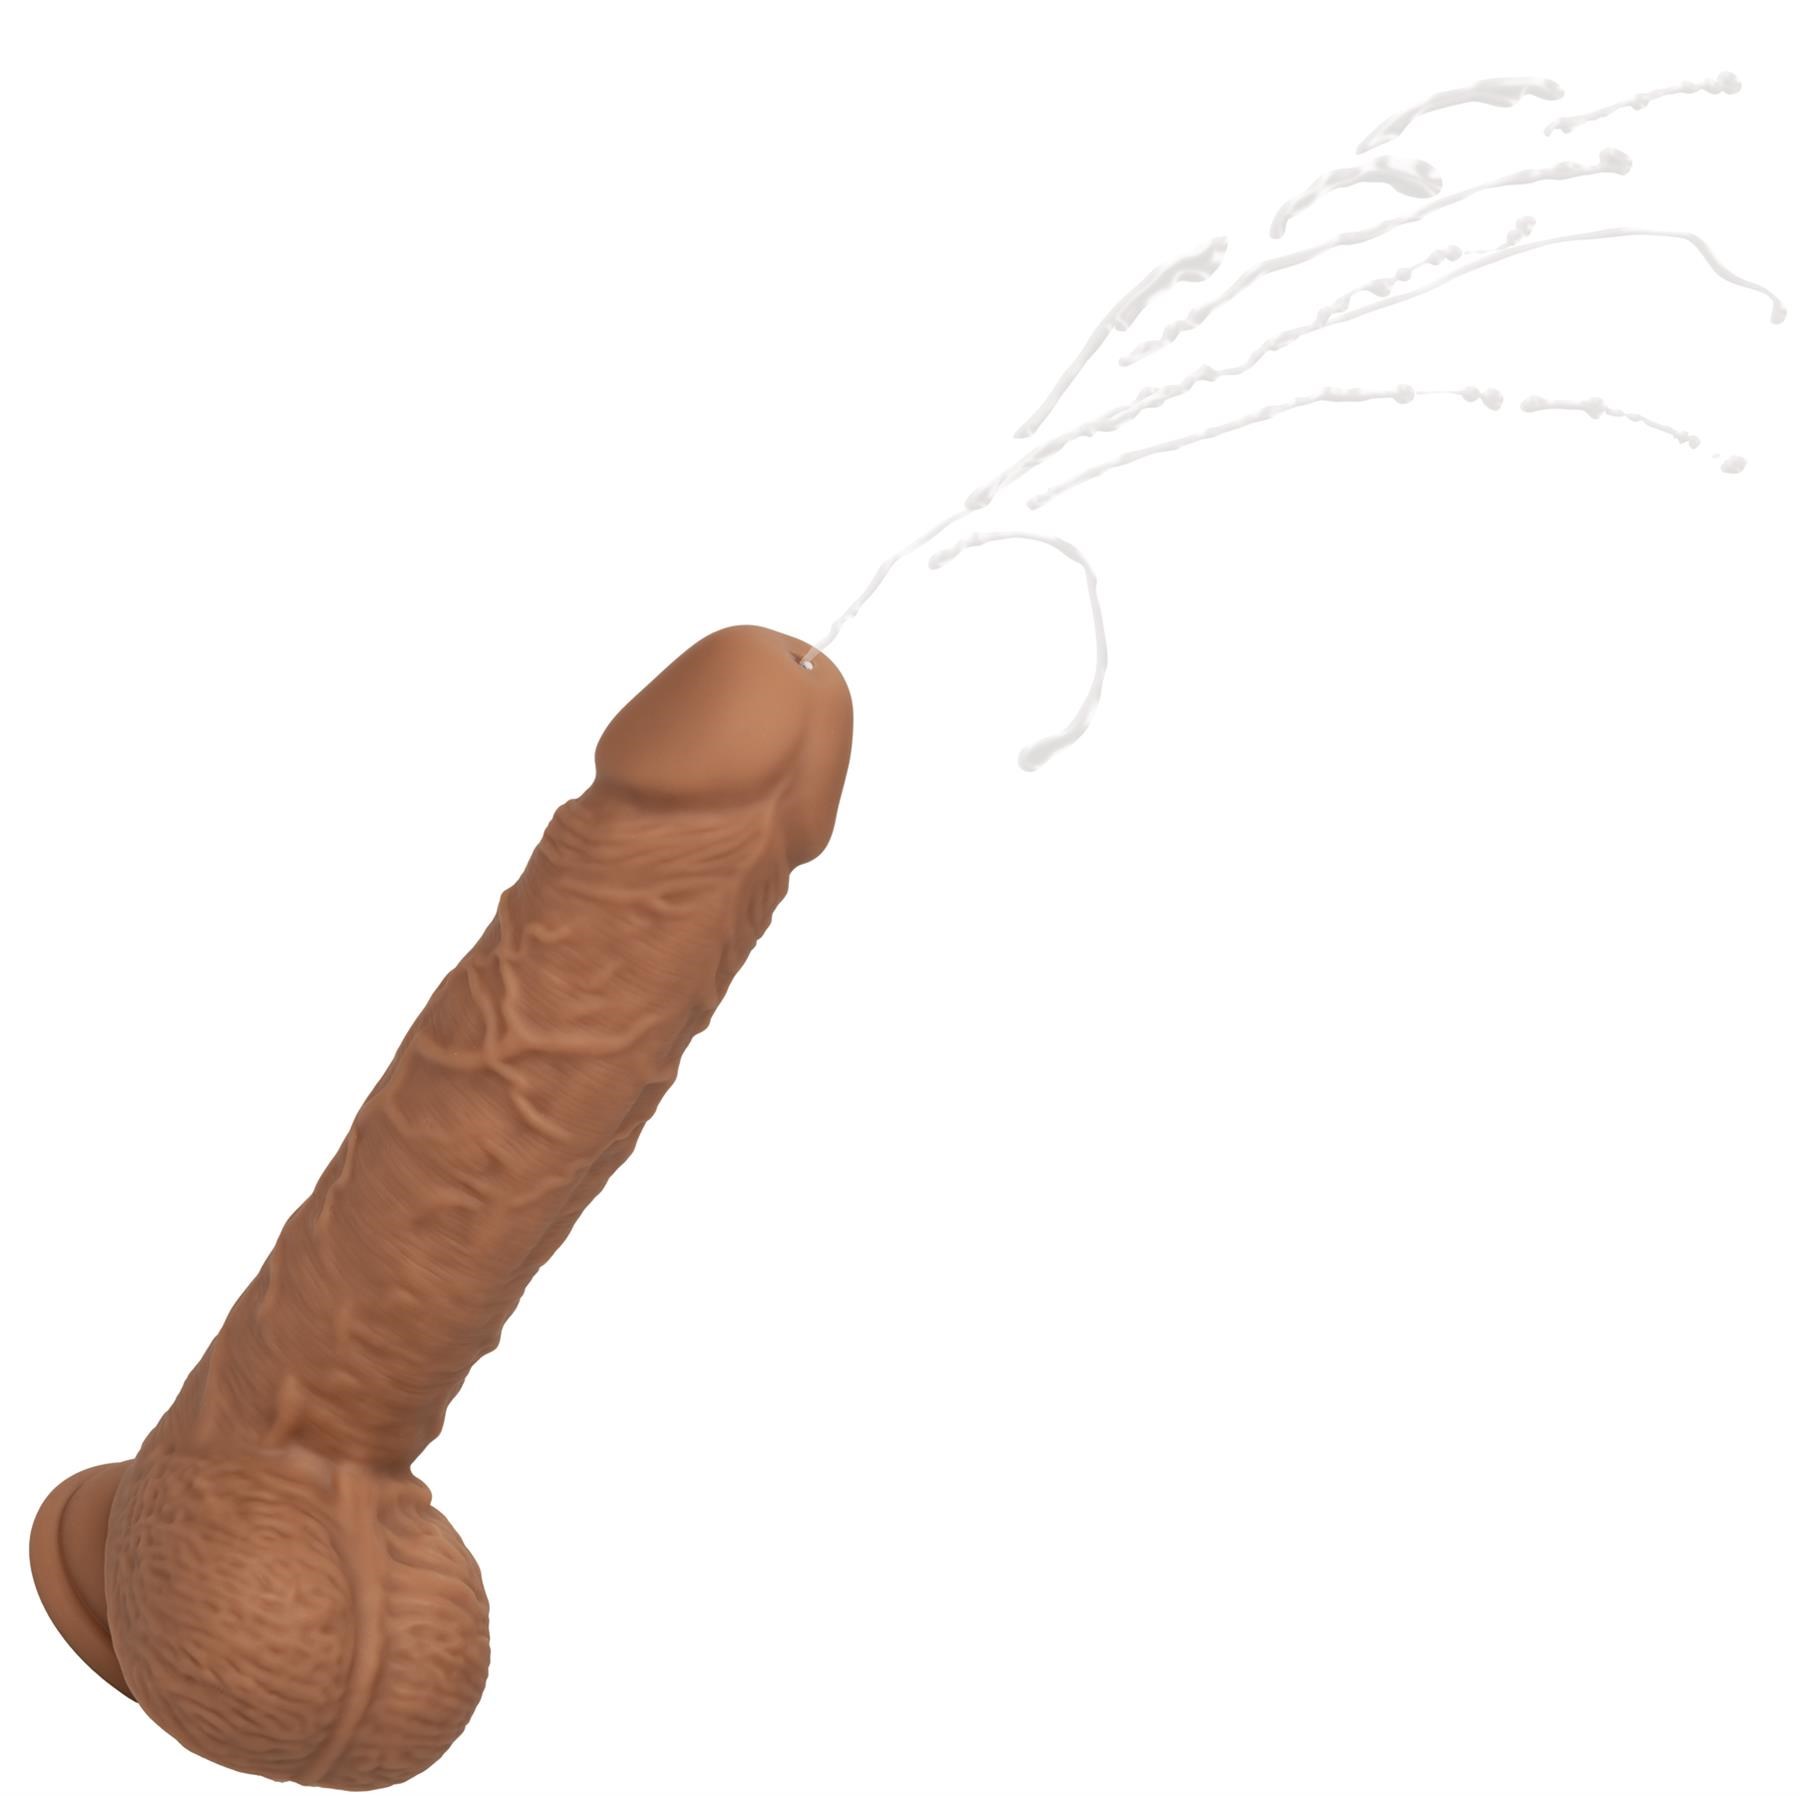 F*ck Stick Squirting and Vibrating Dildo - Product Shot Showing Squirting Action